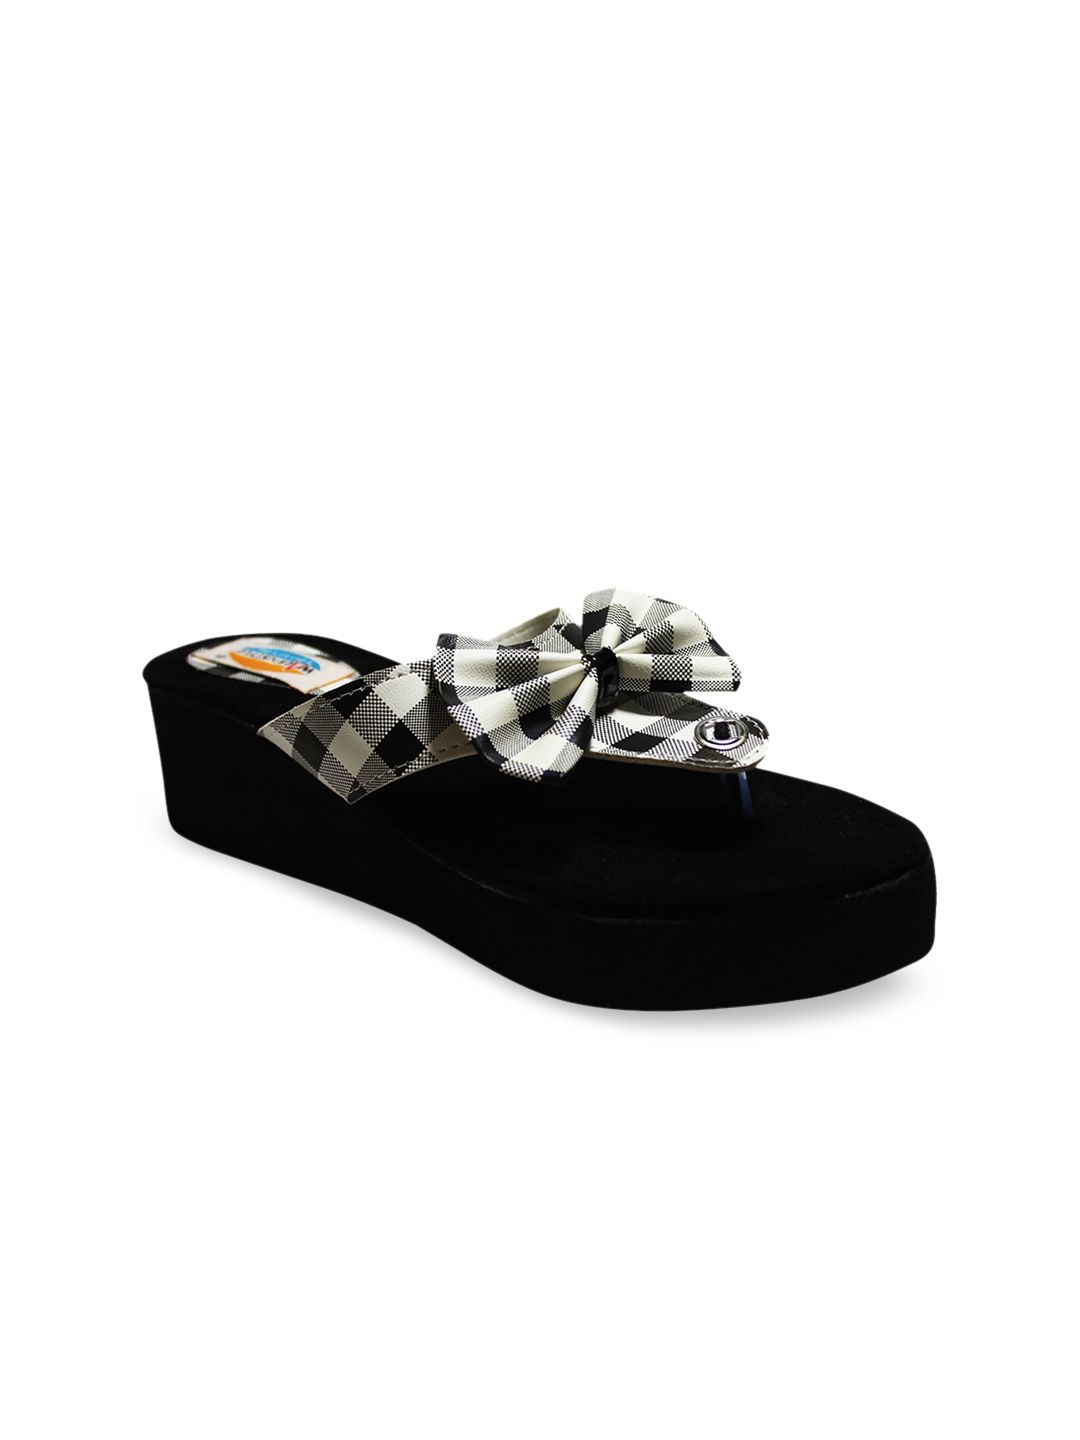 WALK N STYLE COLLECTION Black & White Printed Flatform Heels with Bows Price in India